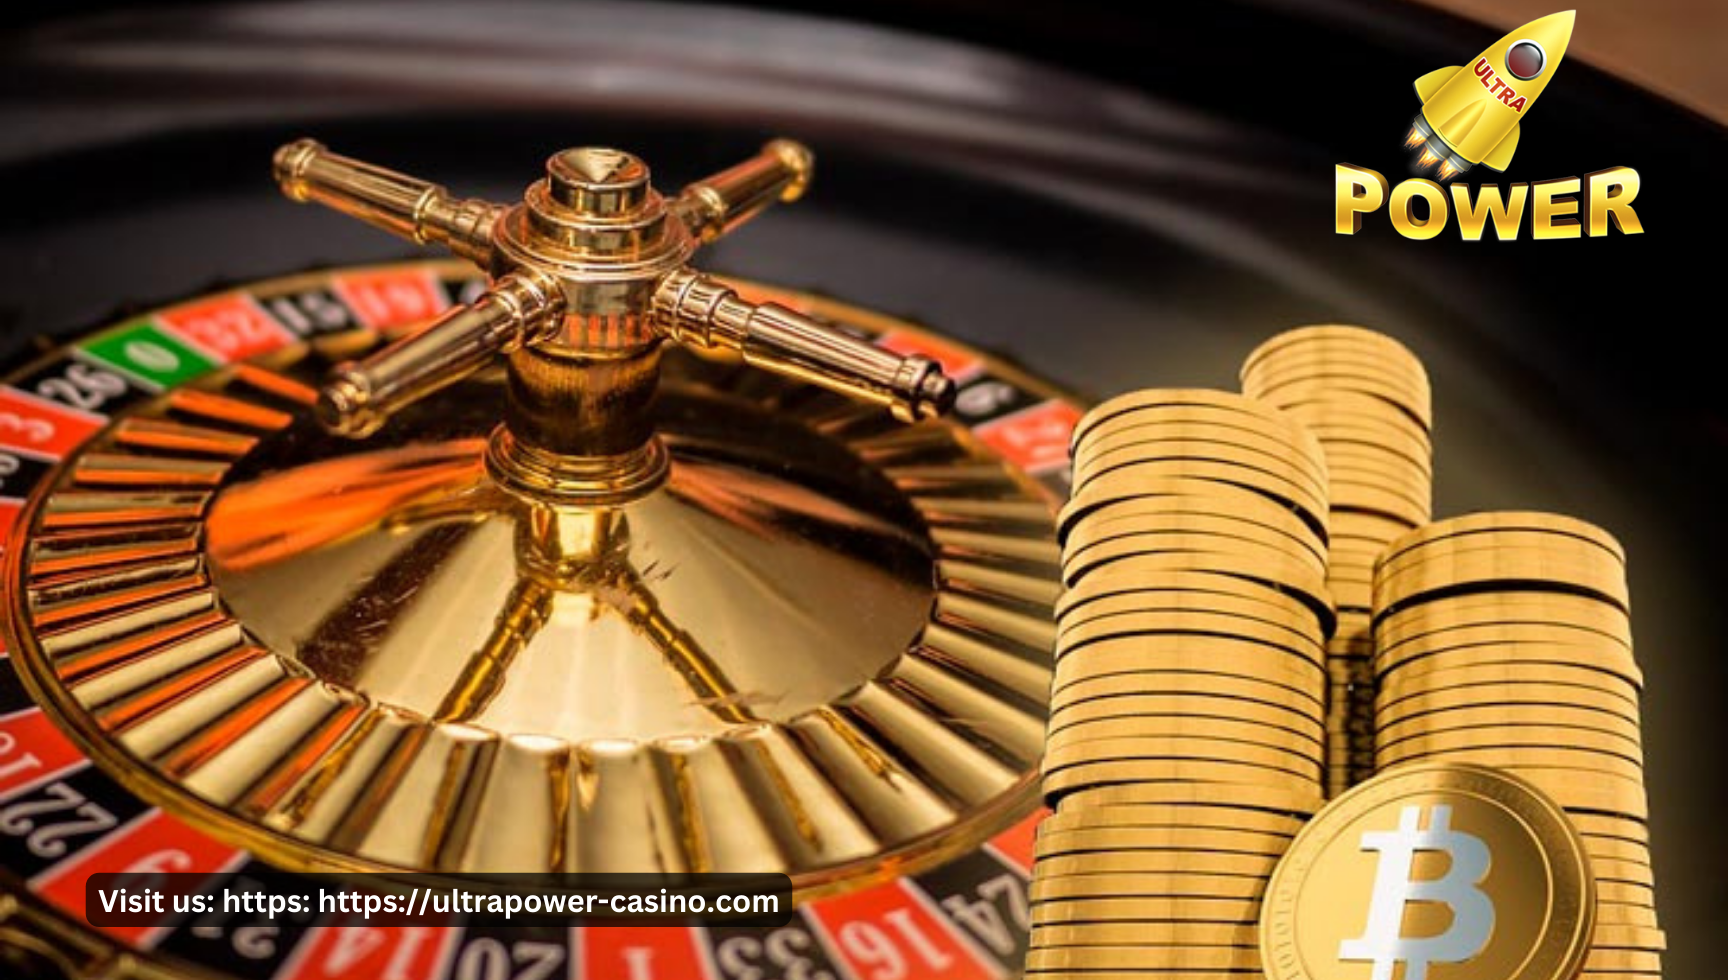 How to Increase Your Chances of Winning at Real Money Online Casinos